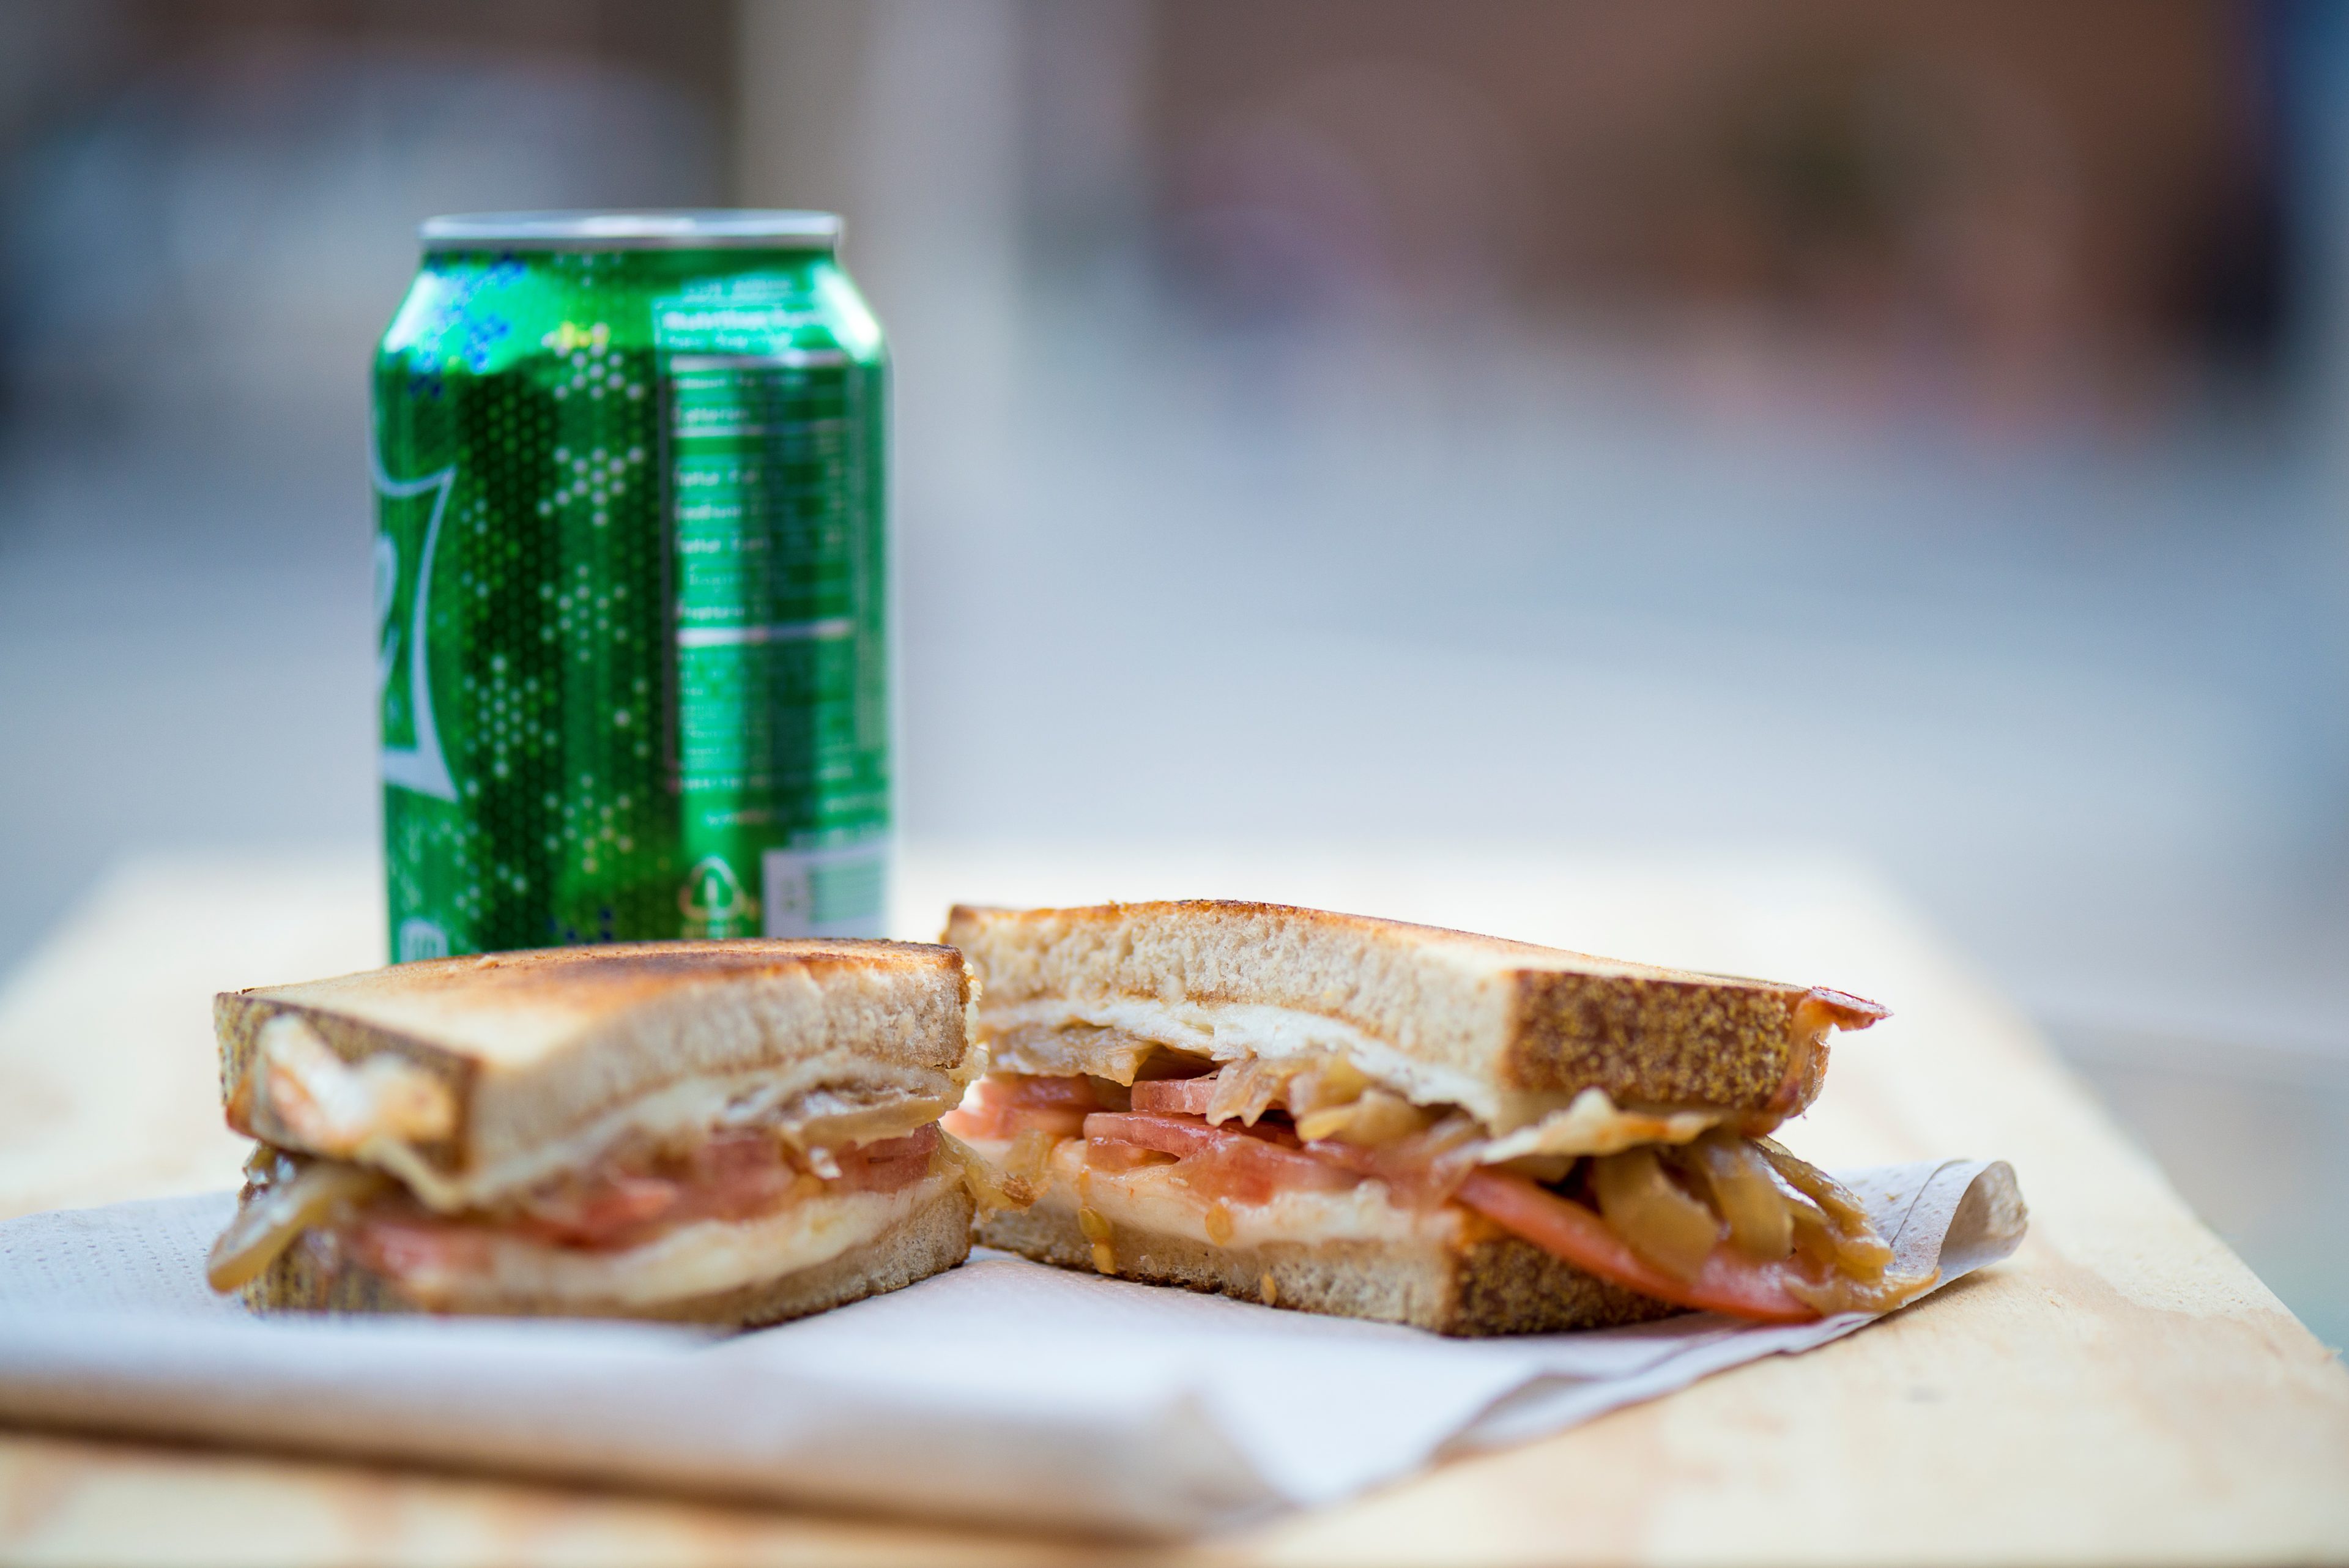 Grilled sandwich and a soda